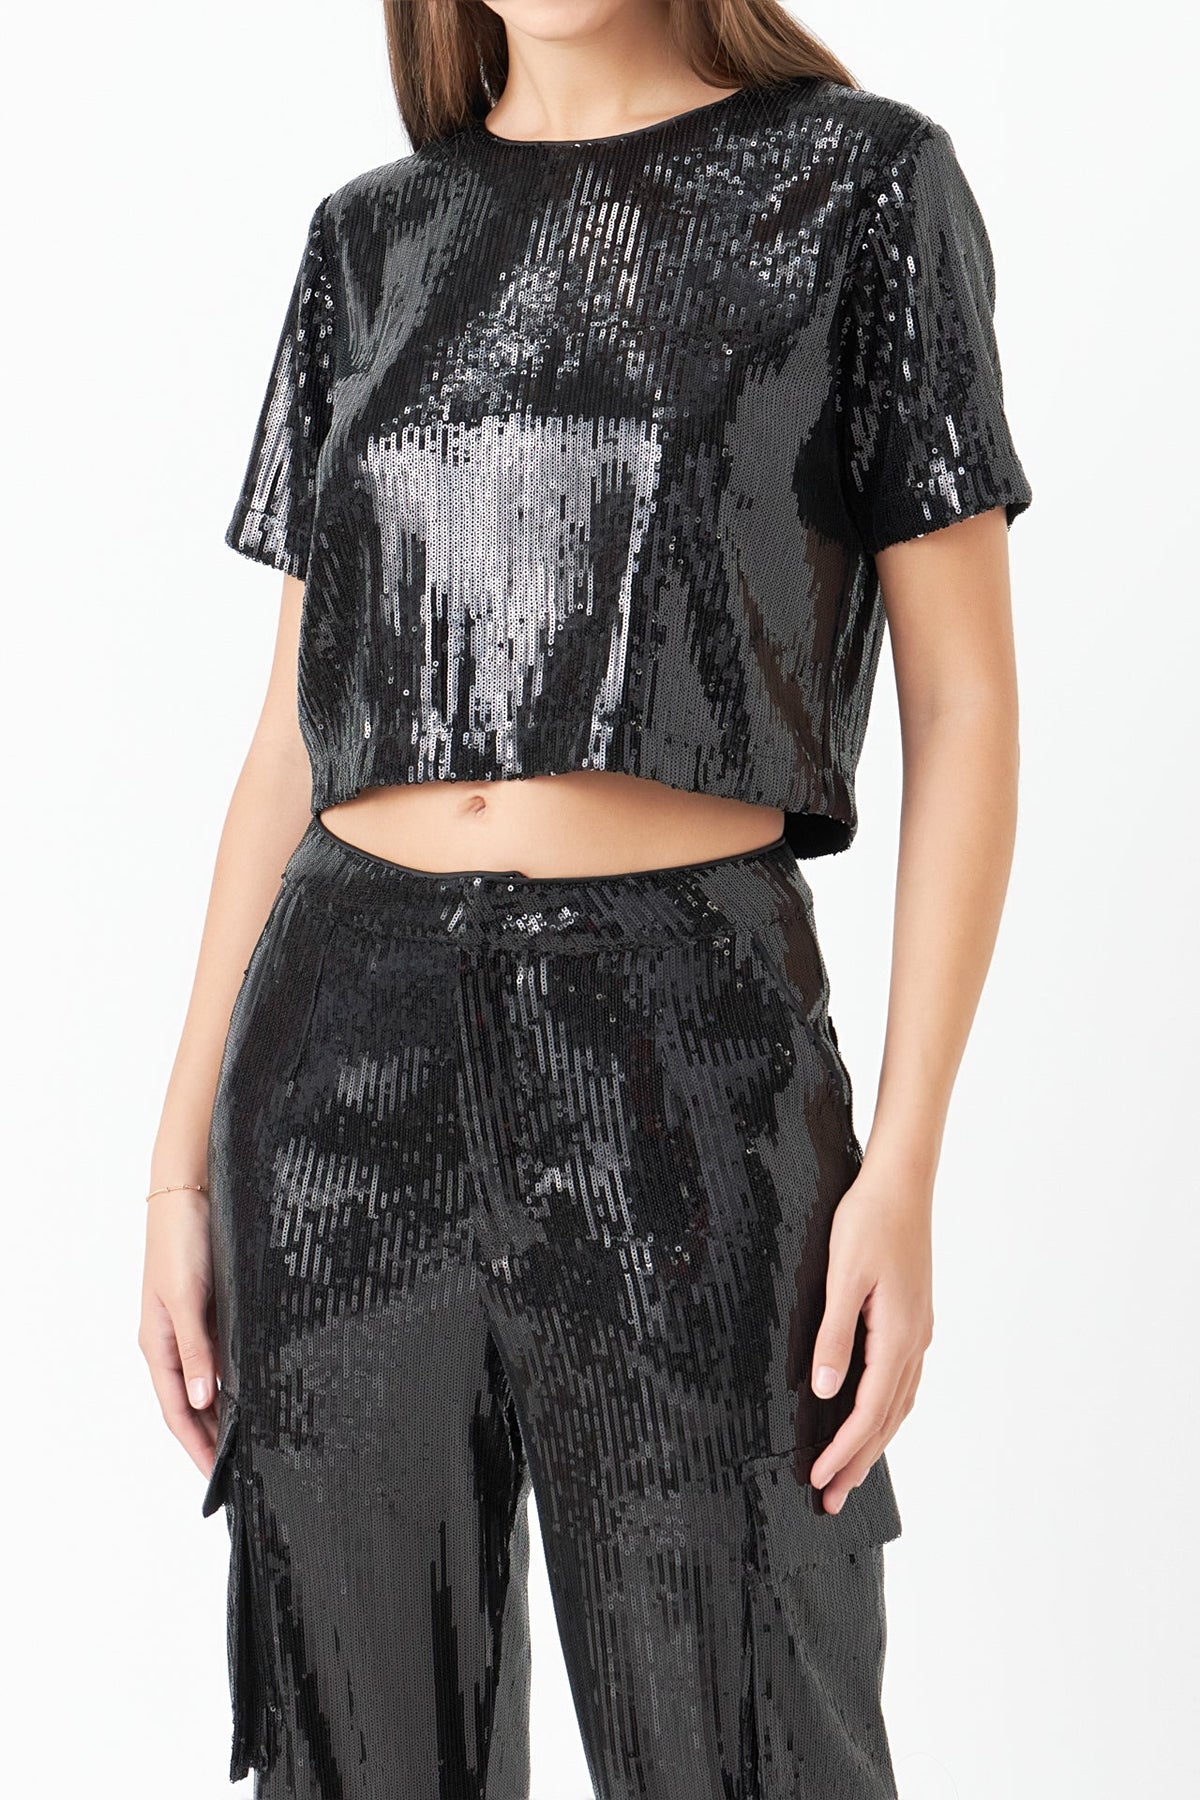 ENDLESS ROSE - Sequins Cropped T Top - T-SHIRTS available at Objectrare